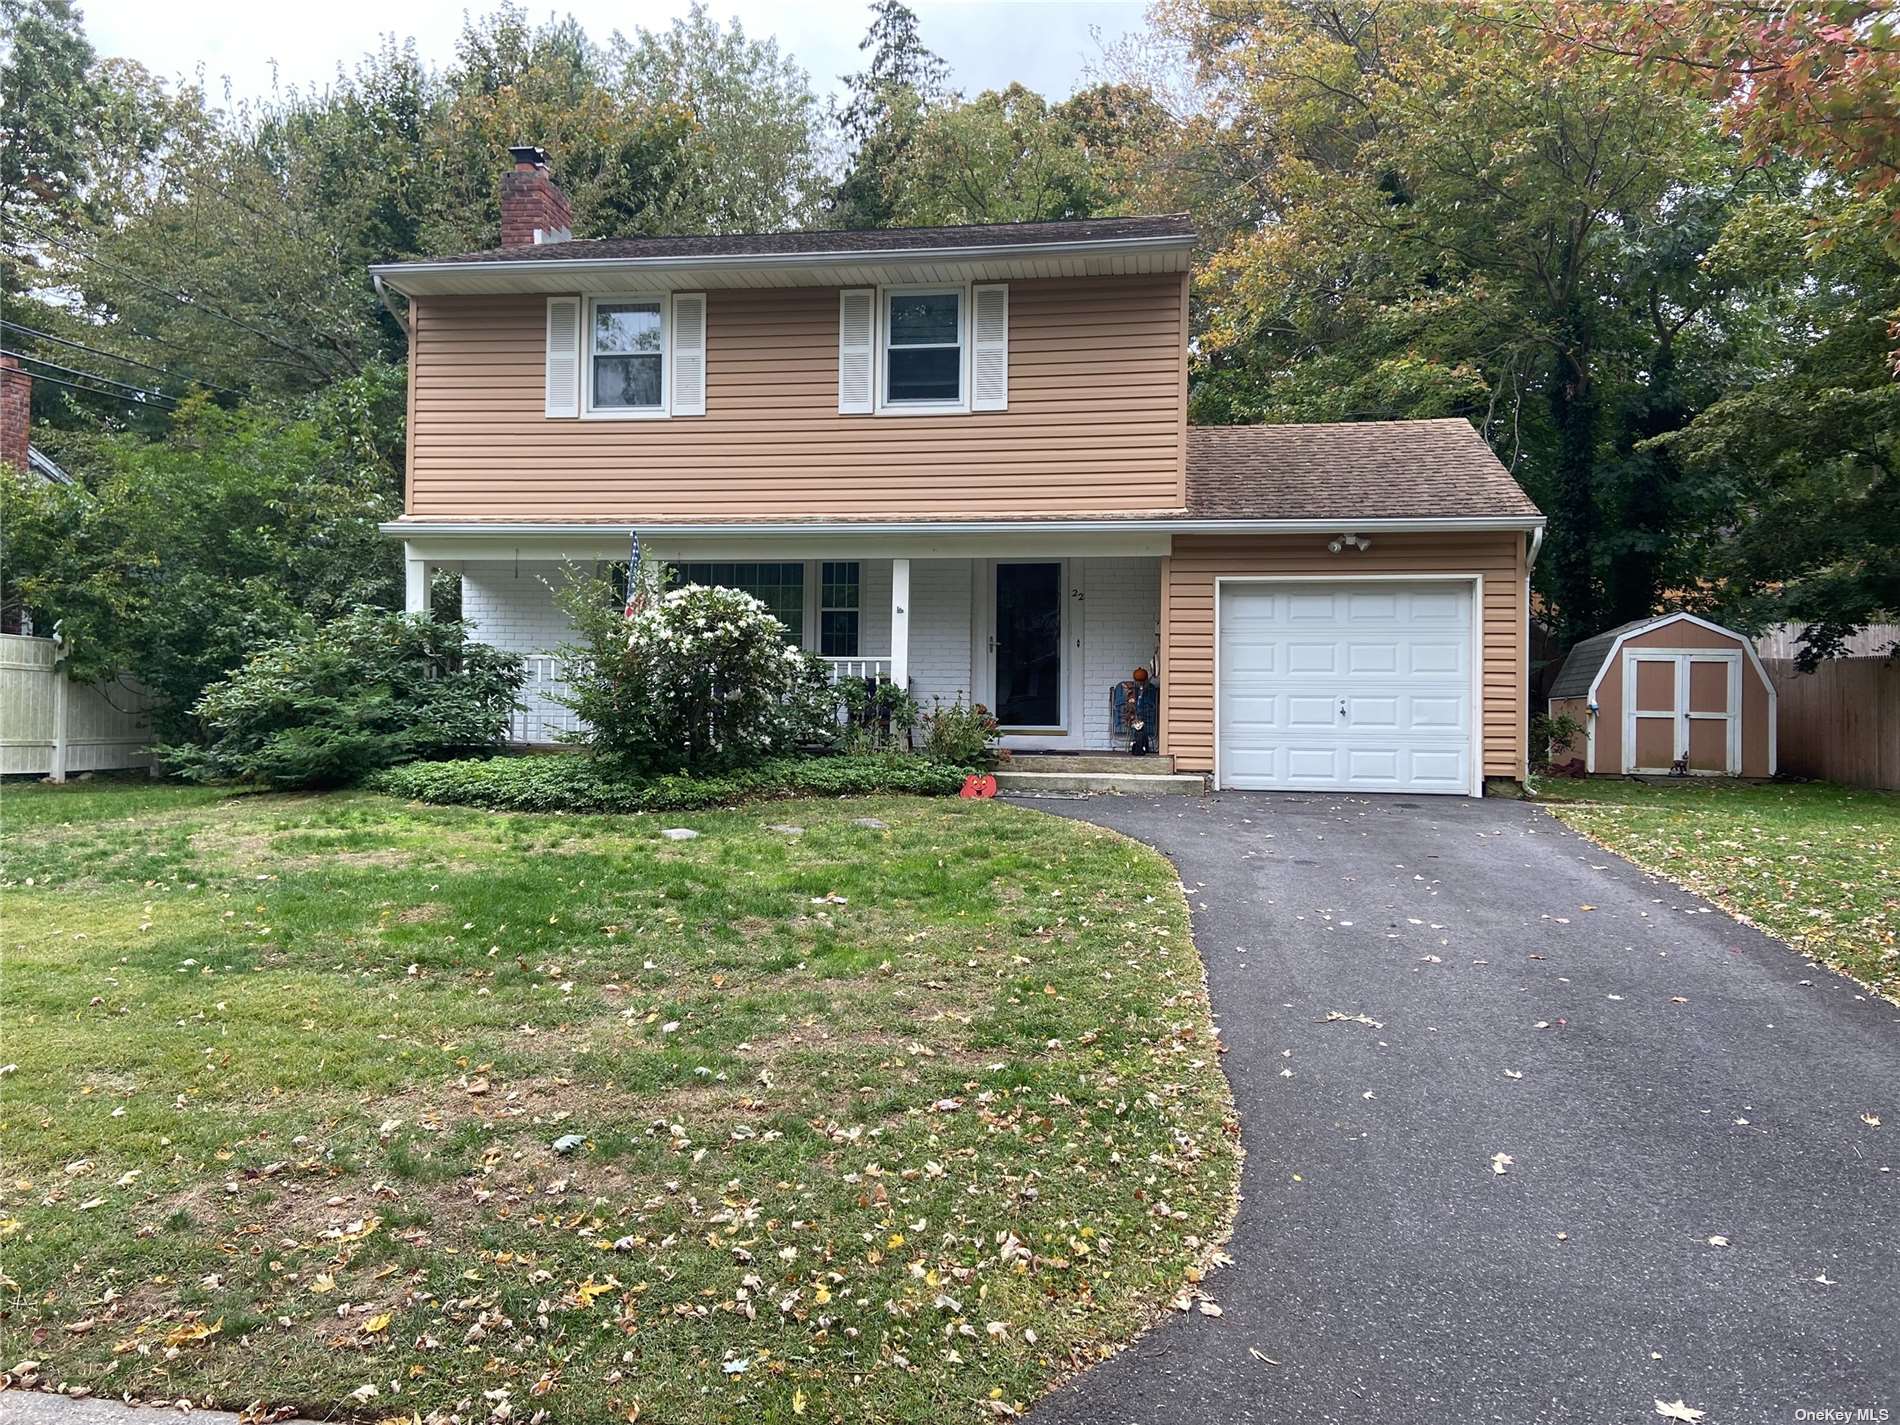 Listing in Port Jefferson, NY